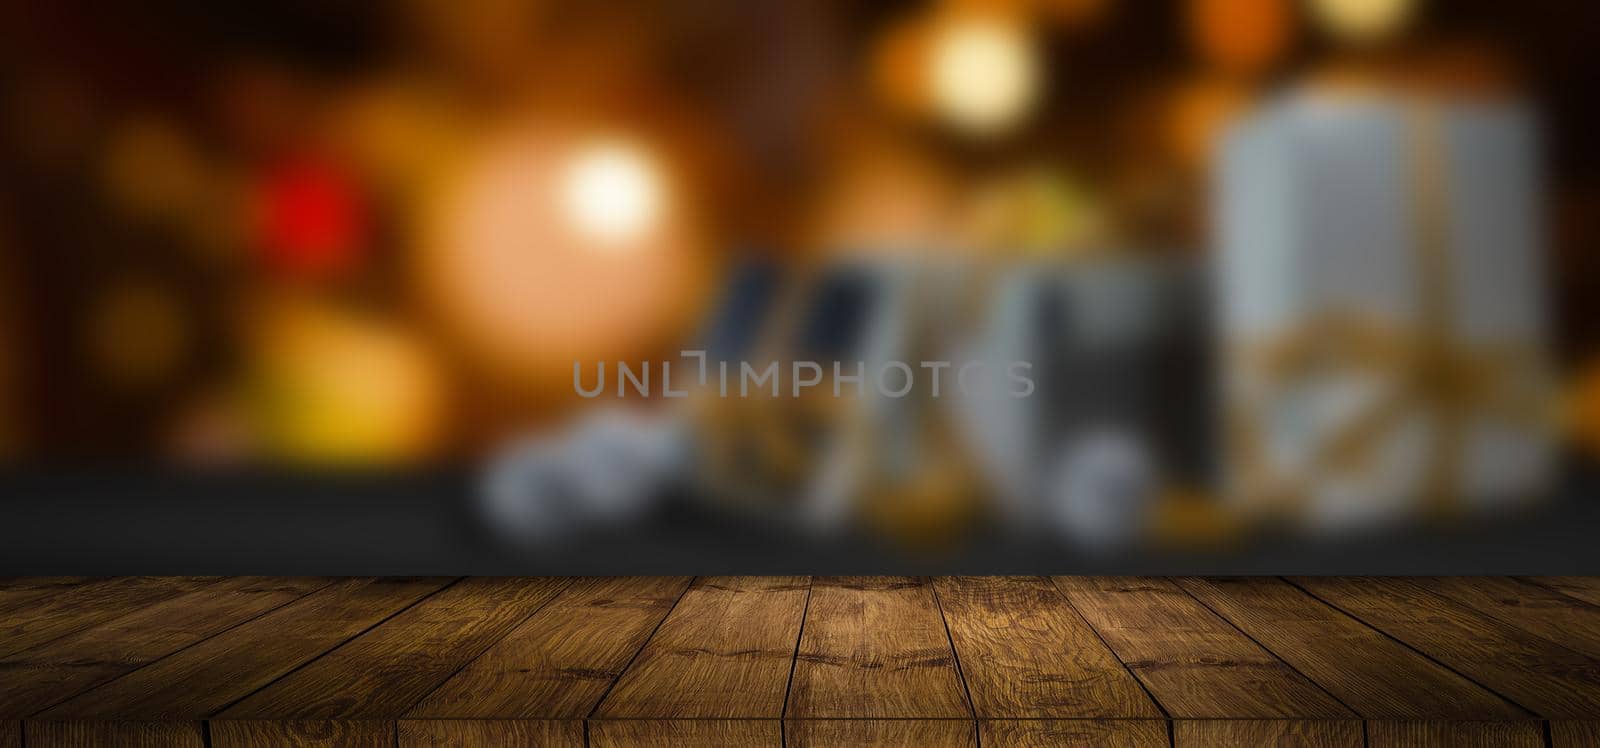 wood table with blured gifts bokeh background.